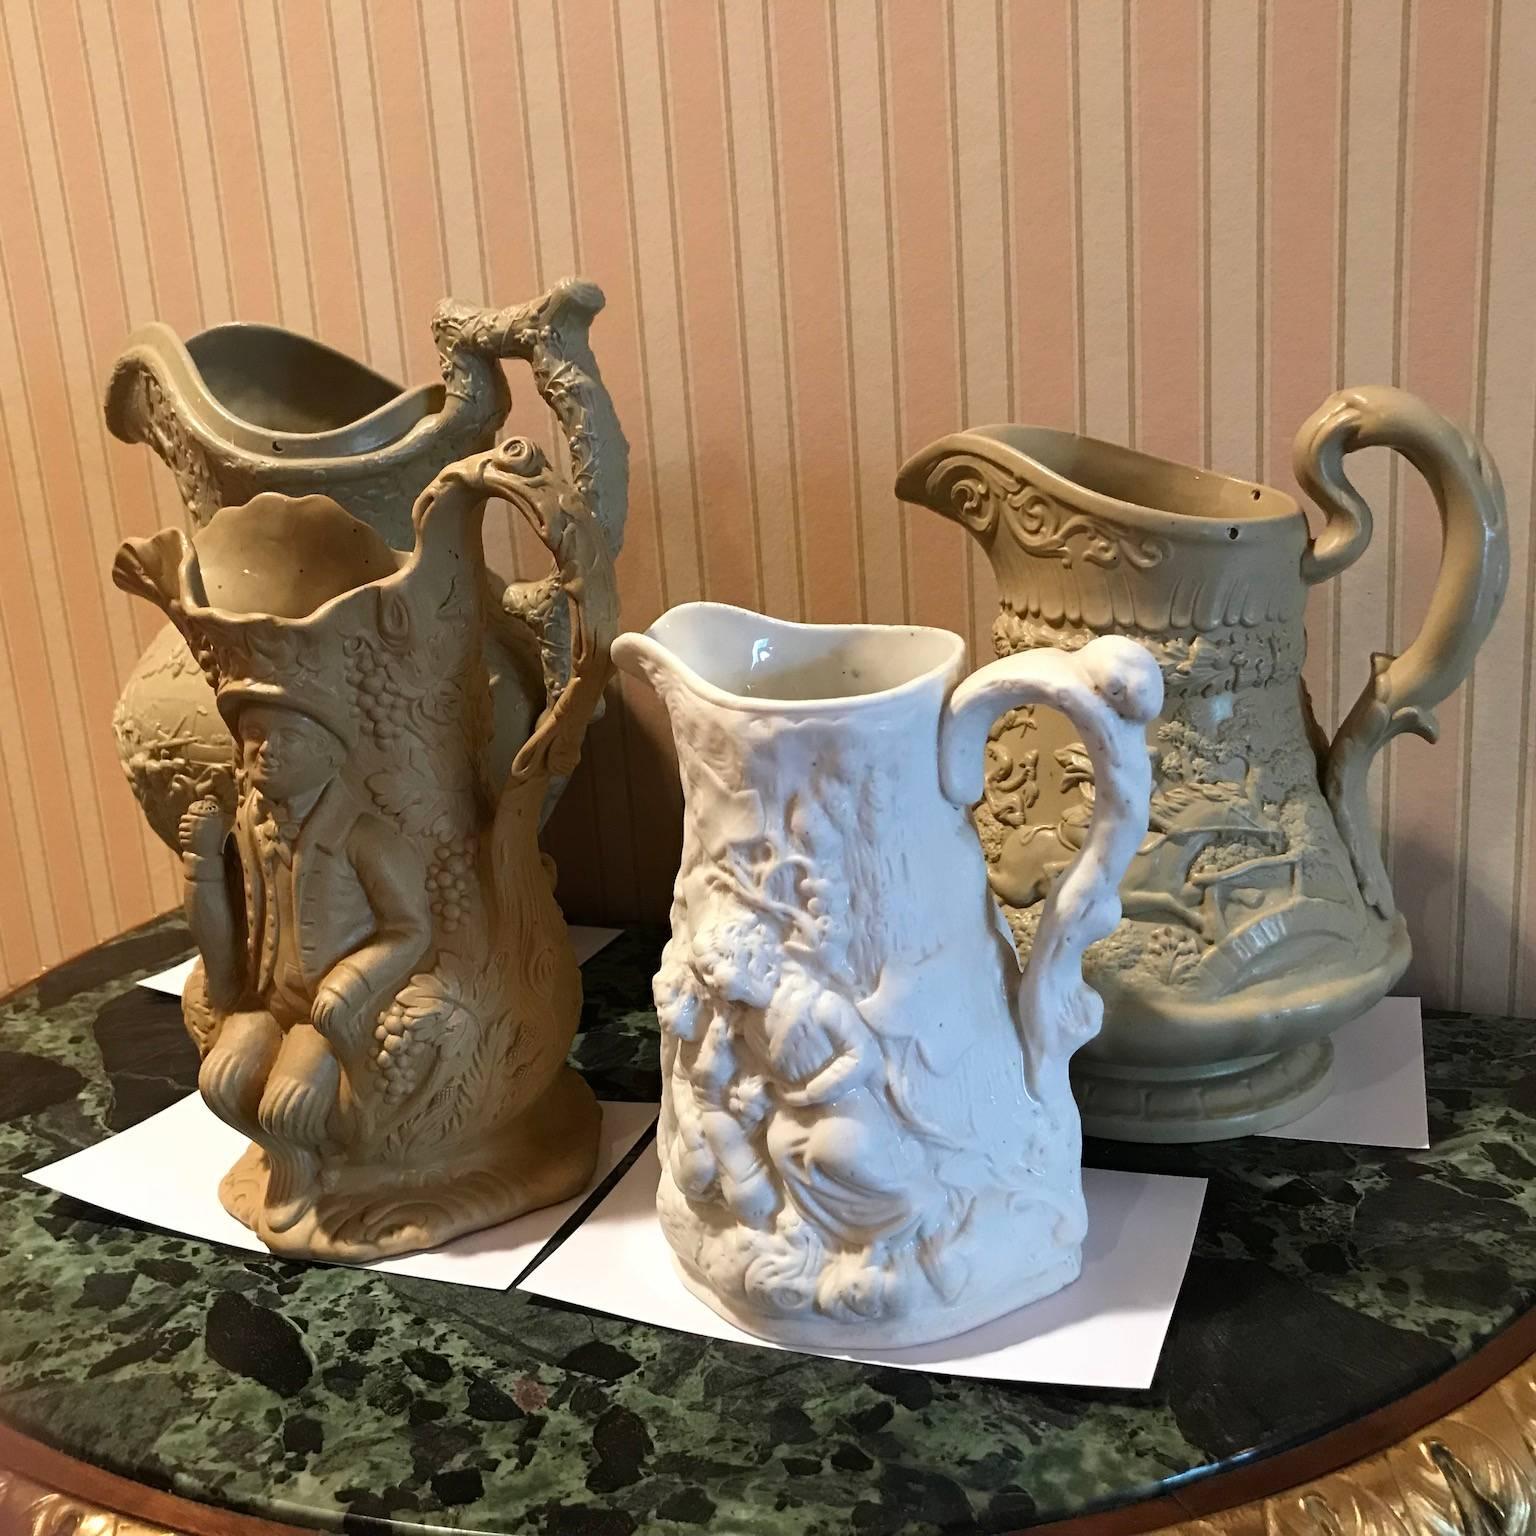 Lot of four ceramic relief pitchers and jugs, all beautifully decorated with scenes and vines. Dimensions (height x width)- First: 7